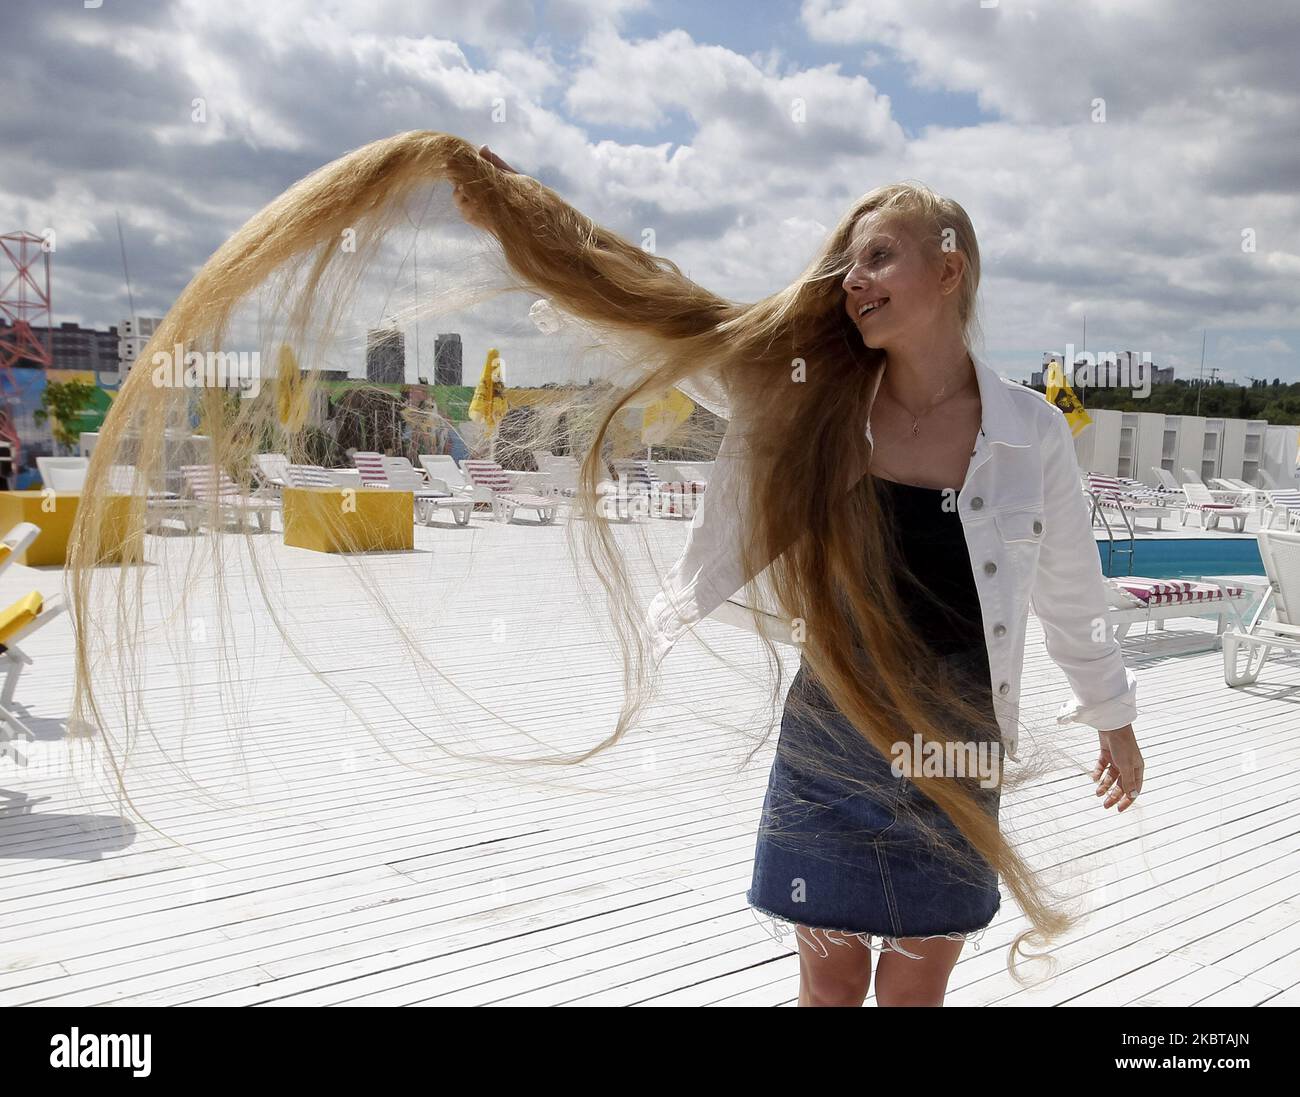 Ukrainian Olena Korzenyuk, 17, shows her hair wich is 2.35 meters long, at the National Registry of Records of Ukraine presentation in Kyiv, Ukraine, on 09 July, 2020. Olena Korzenyuk is considered the record holder with the longest hair among teenagers in Ukraine. (Photo by STR/NurPhoto) Stock Photo